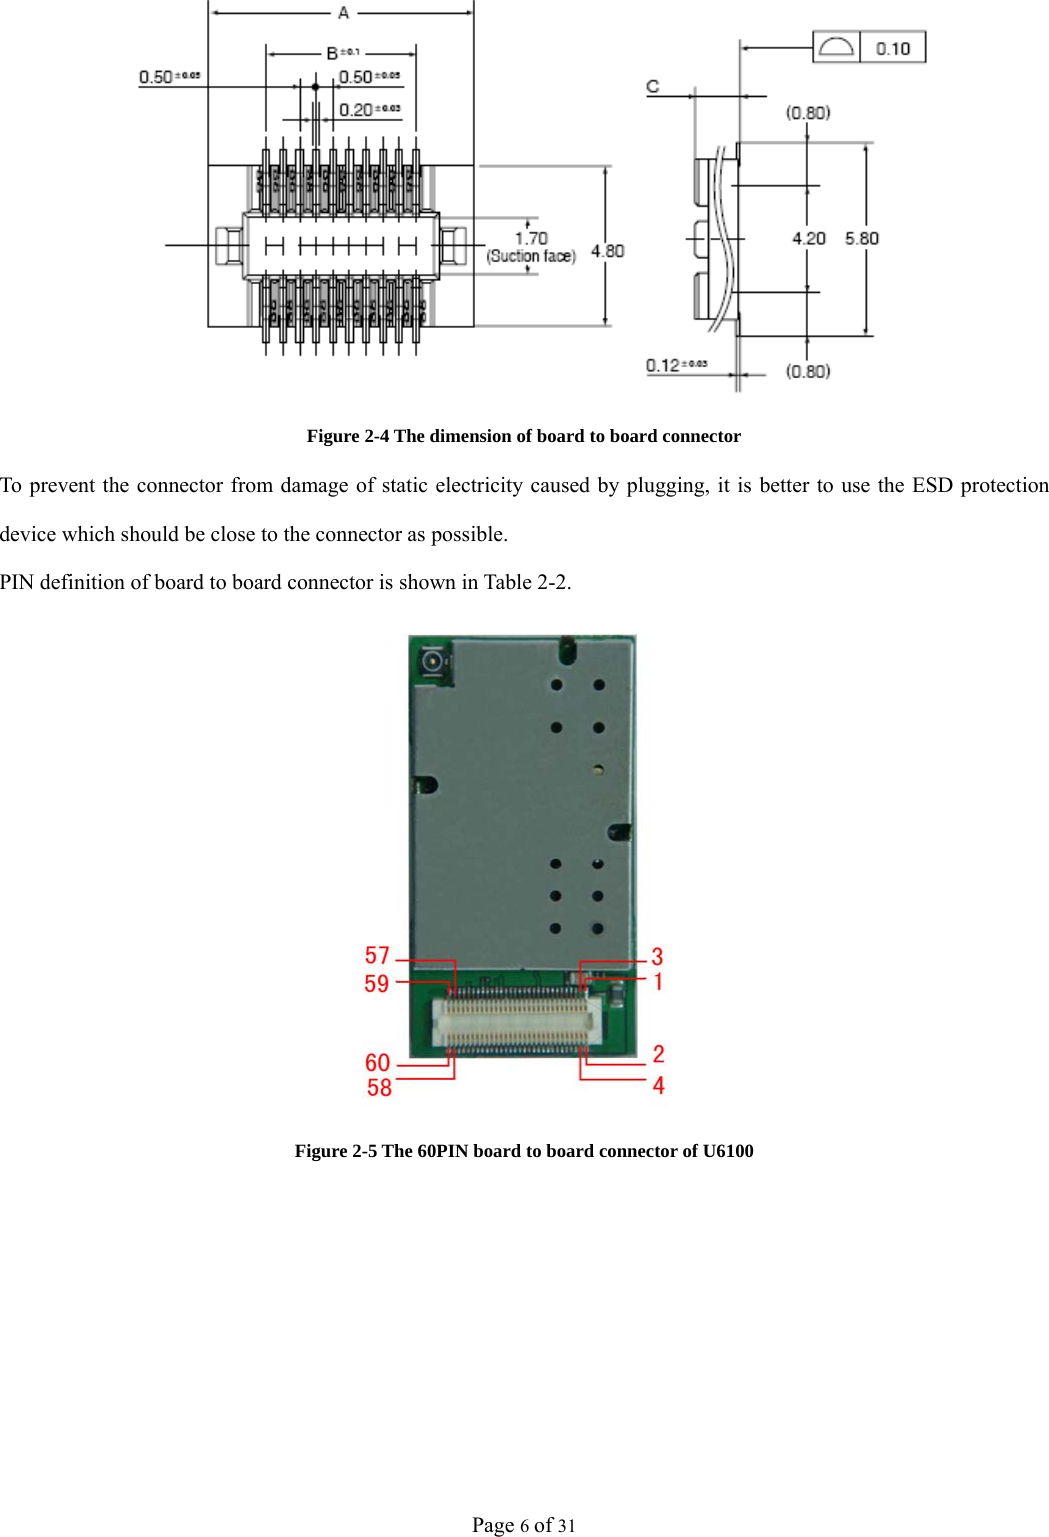 Page 6 of 31  Figure 2-4 The dimension of board to board connector To prevent the connector from damage of static electricity caused by plugging, it is better to use the ESD protection device which should be close to the connector as possible.   PIN definition of board to board connector is shown in Table 2-2.  Figure 2-5 The 60PIN board to board connector of U6100       